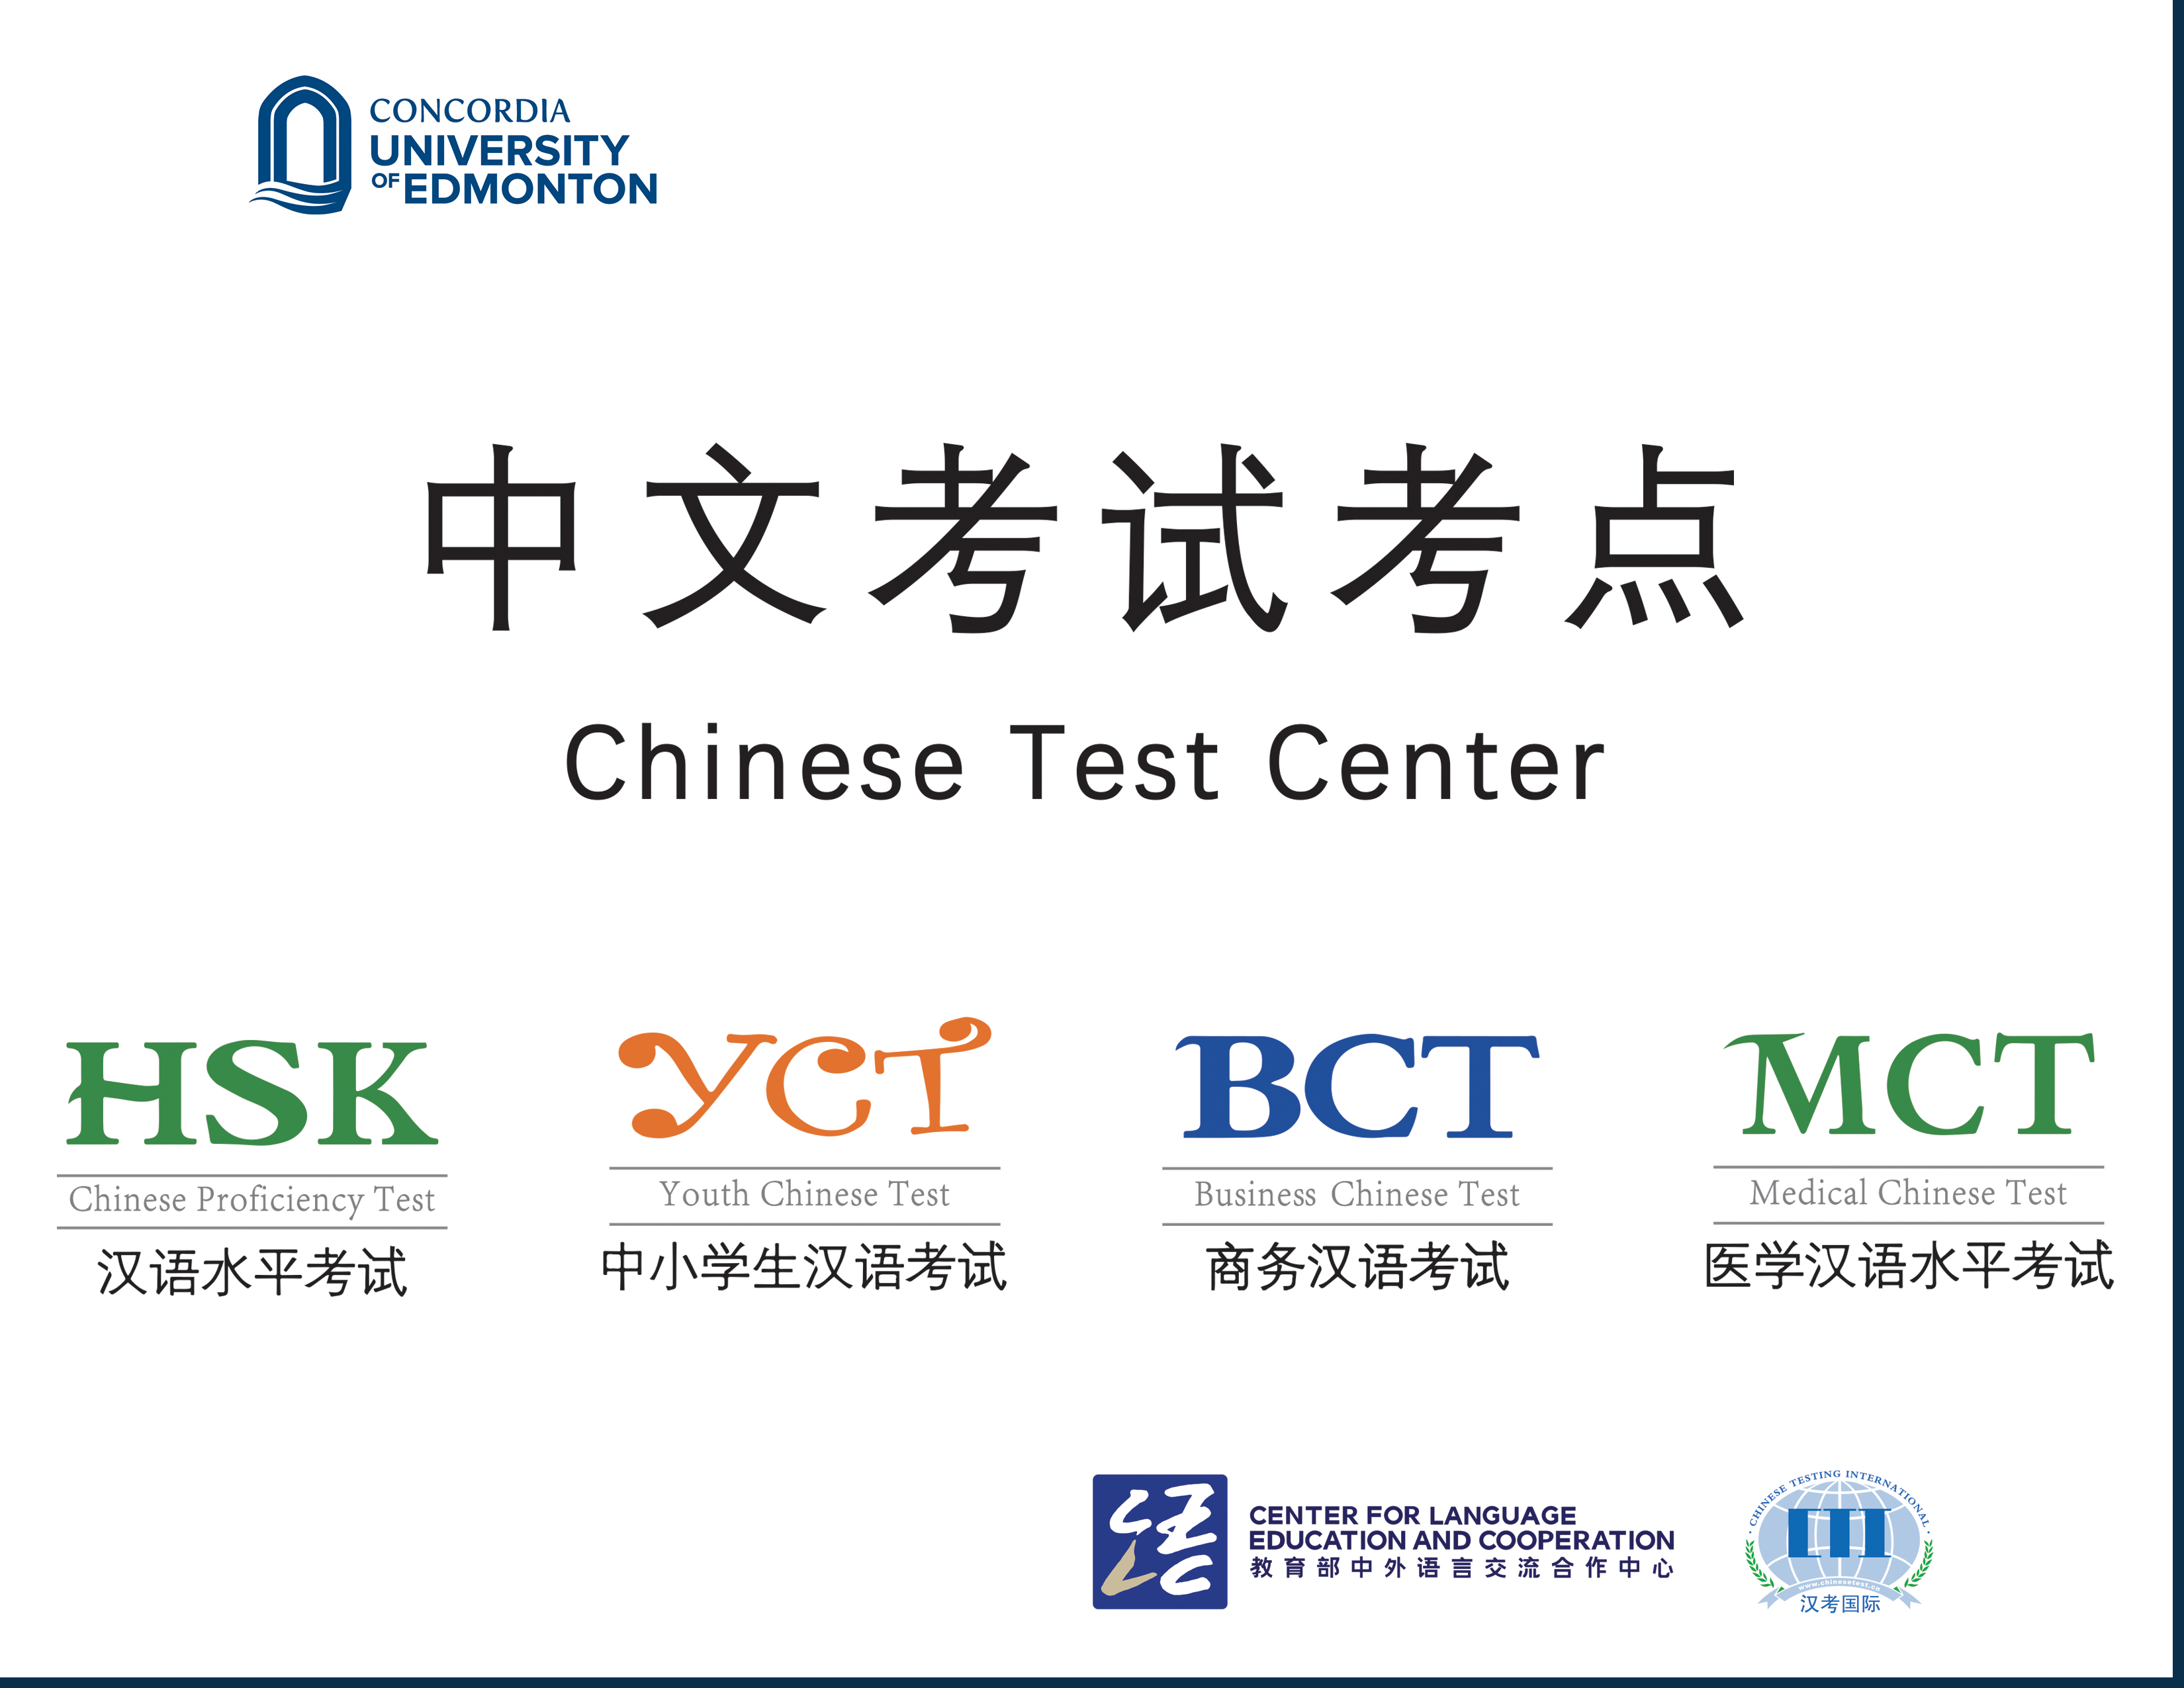 Chinese Test Centre is now located at CUE!